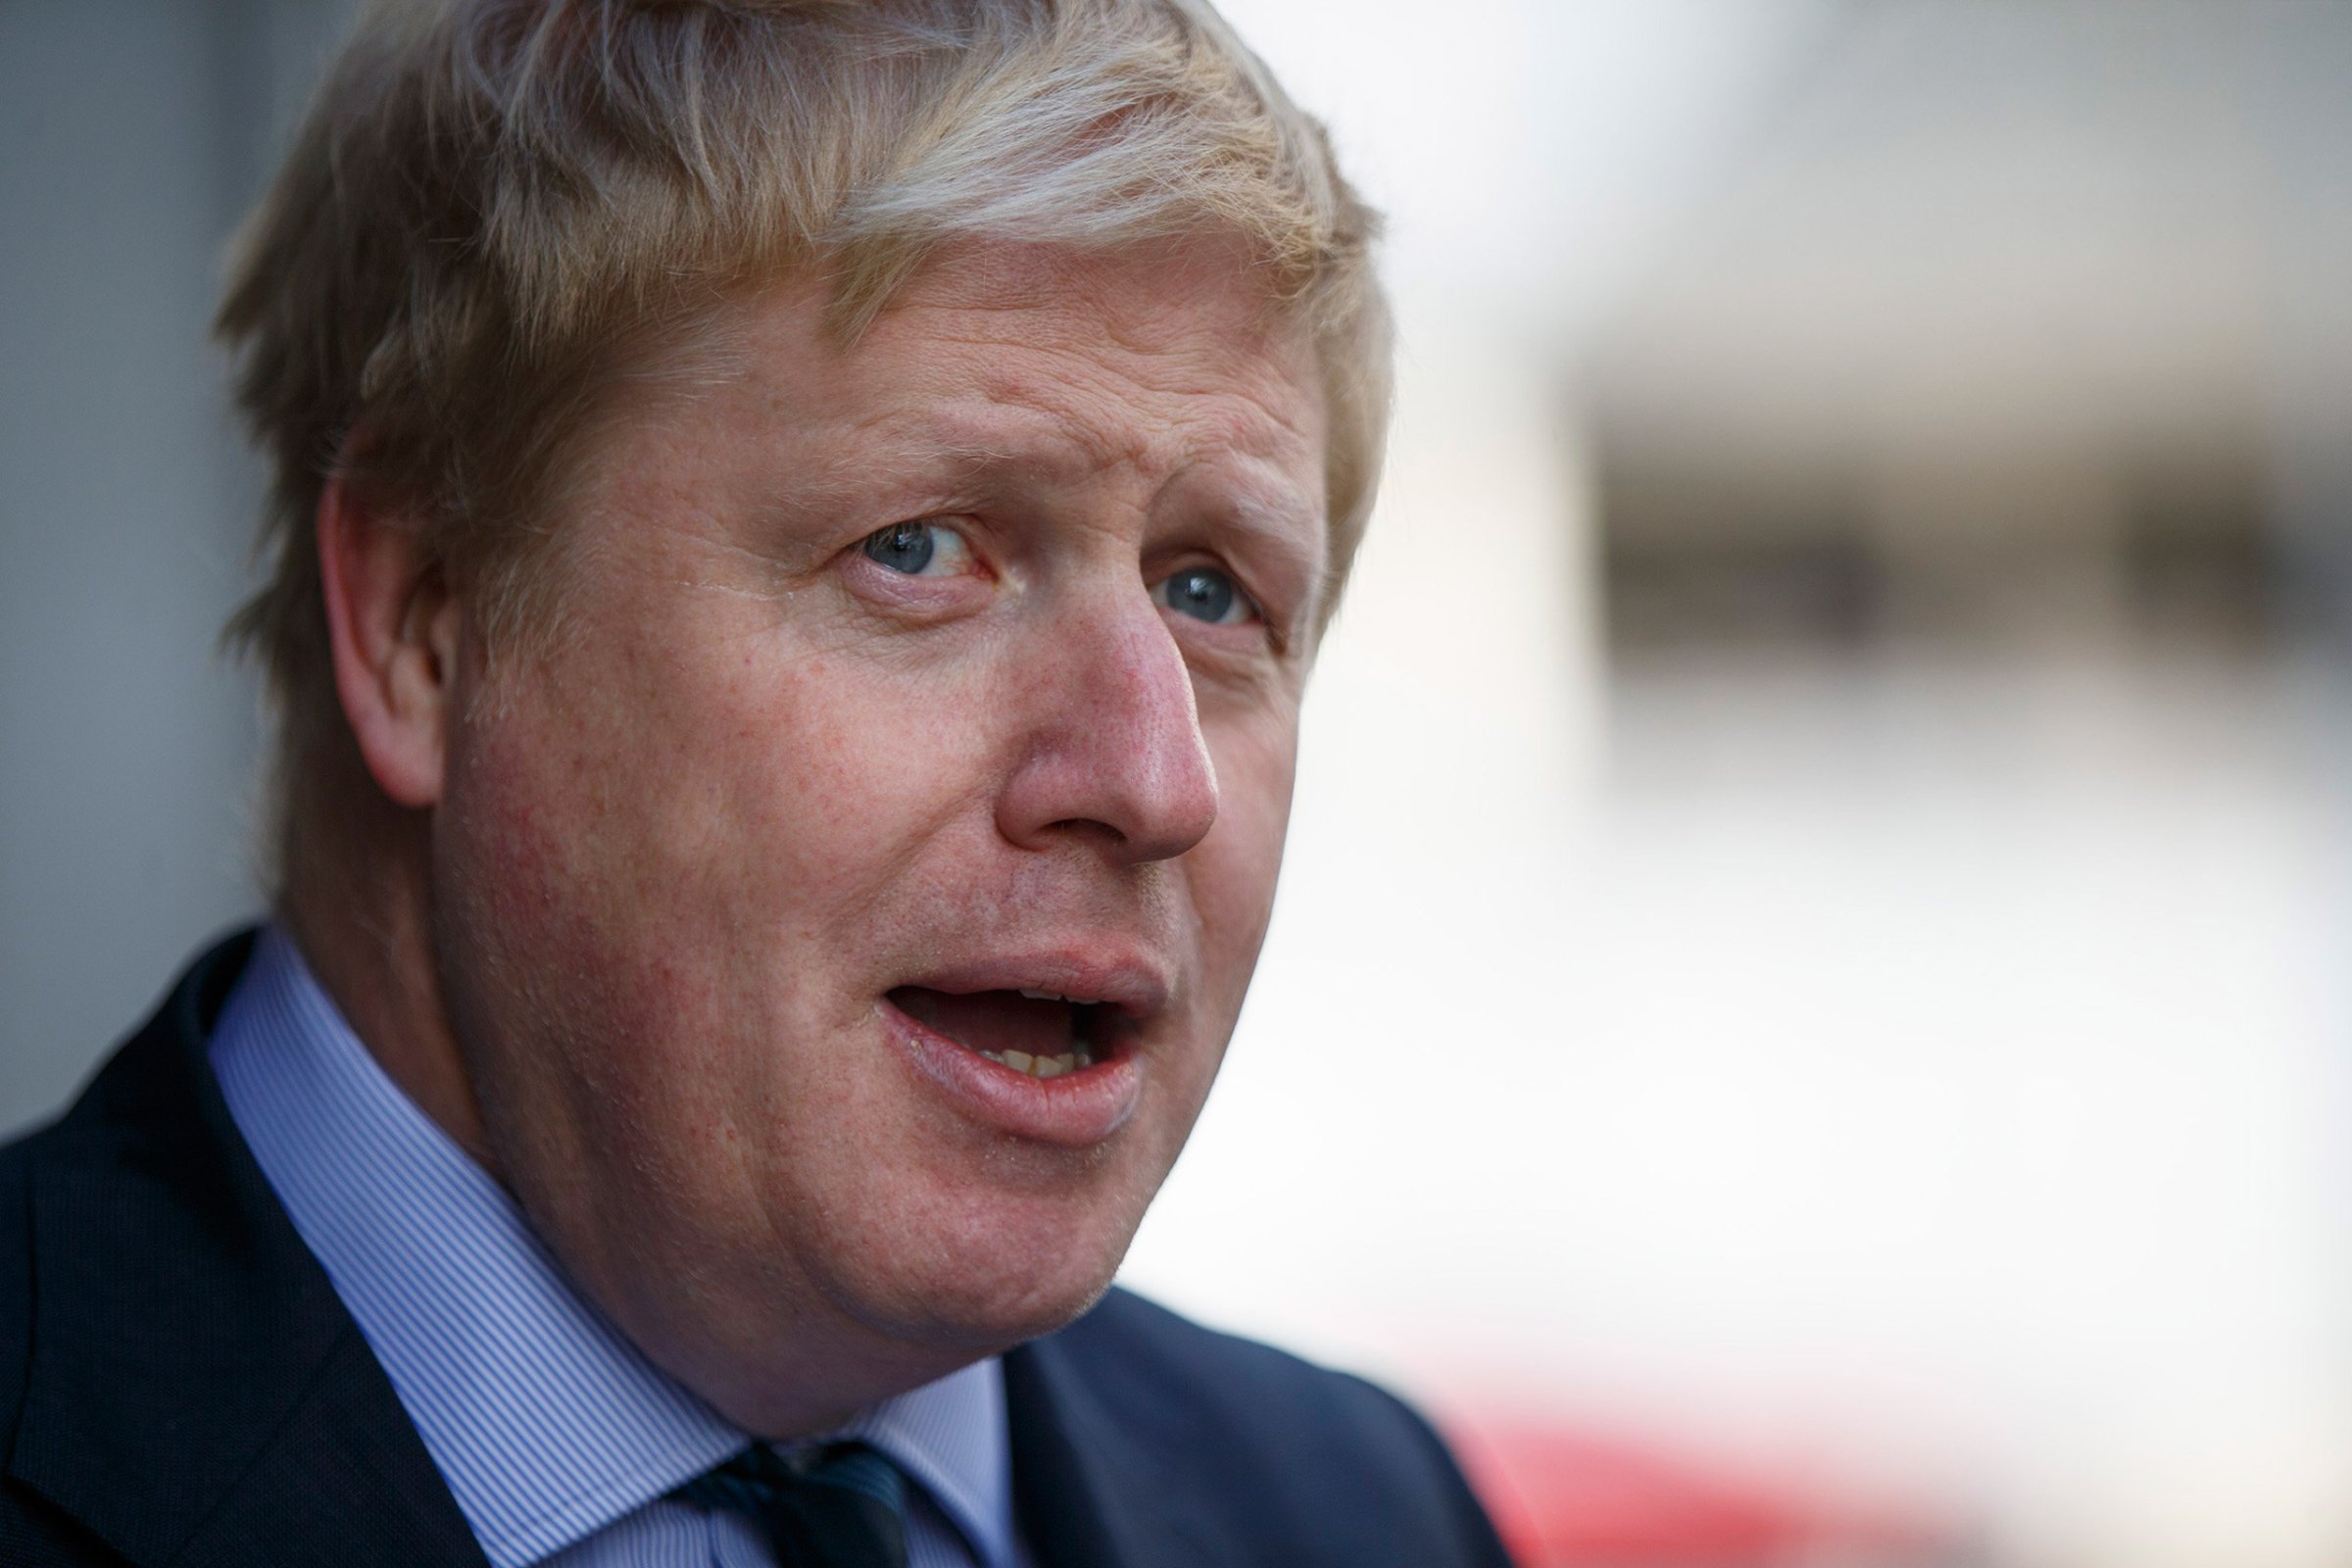 London Mayor Boris Johnson speaks to the media at Here East, the former press and broadcast center in the Queen Elizabeth Olympic Park, after kick starting National Apprenticeship Week in London, March 14, 2016.